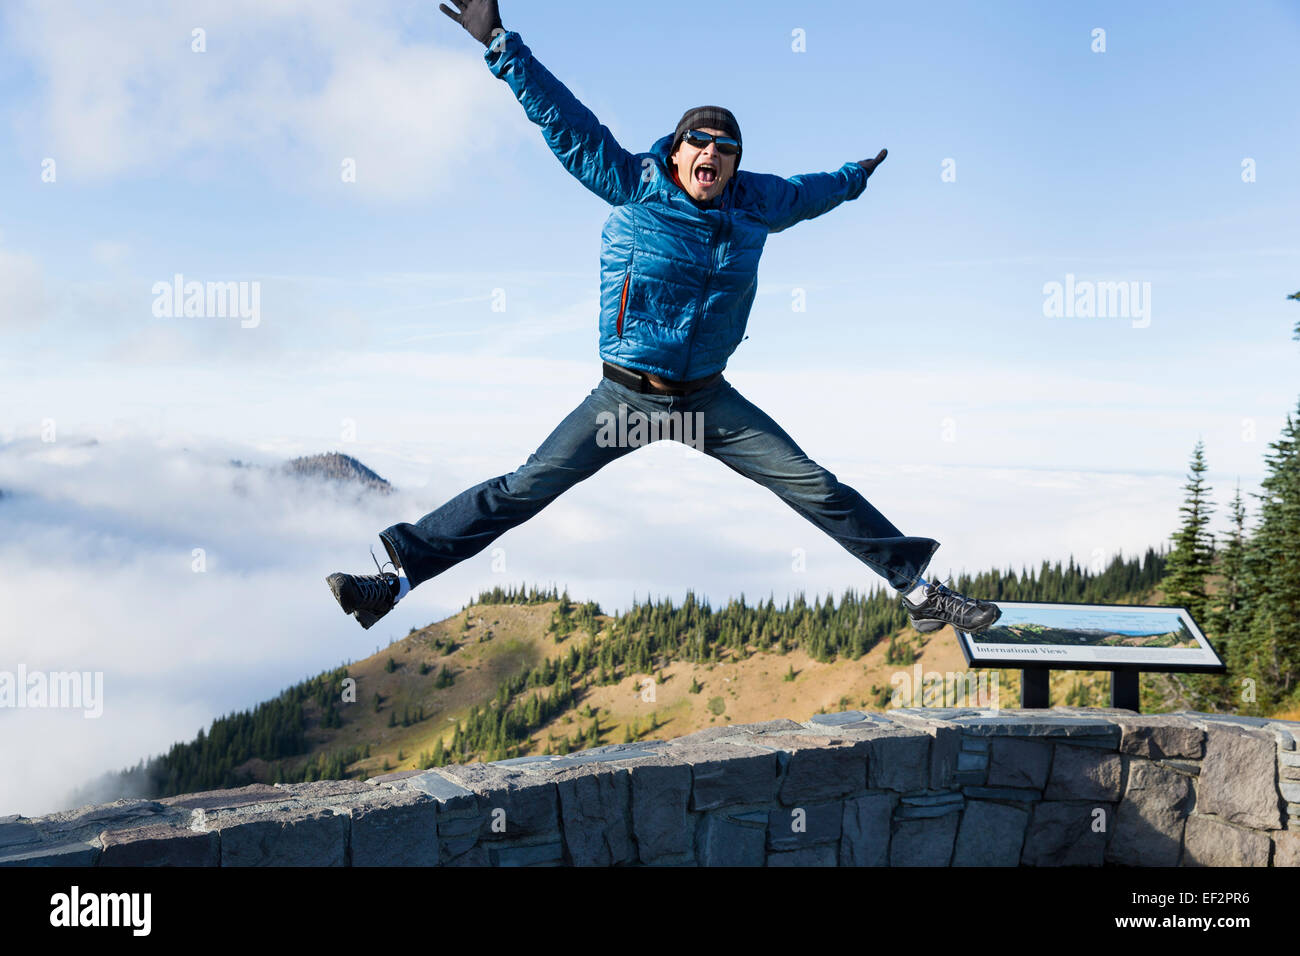 Young male jumping straight on of a wall, with his legs spread out in a funny pose, with a beautiful mountain background Stock Photo